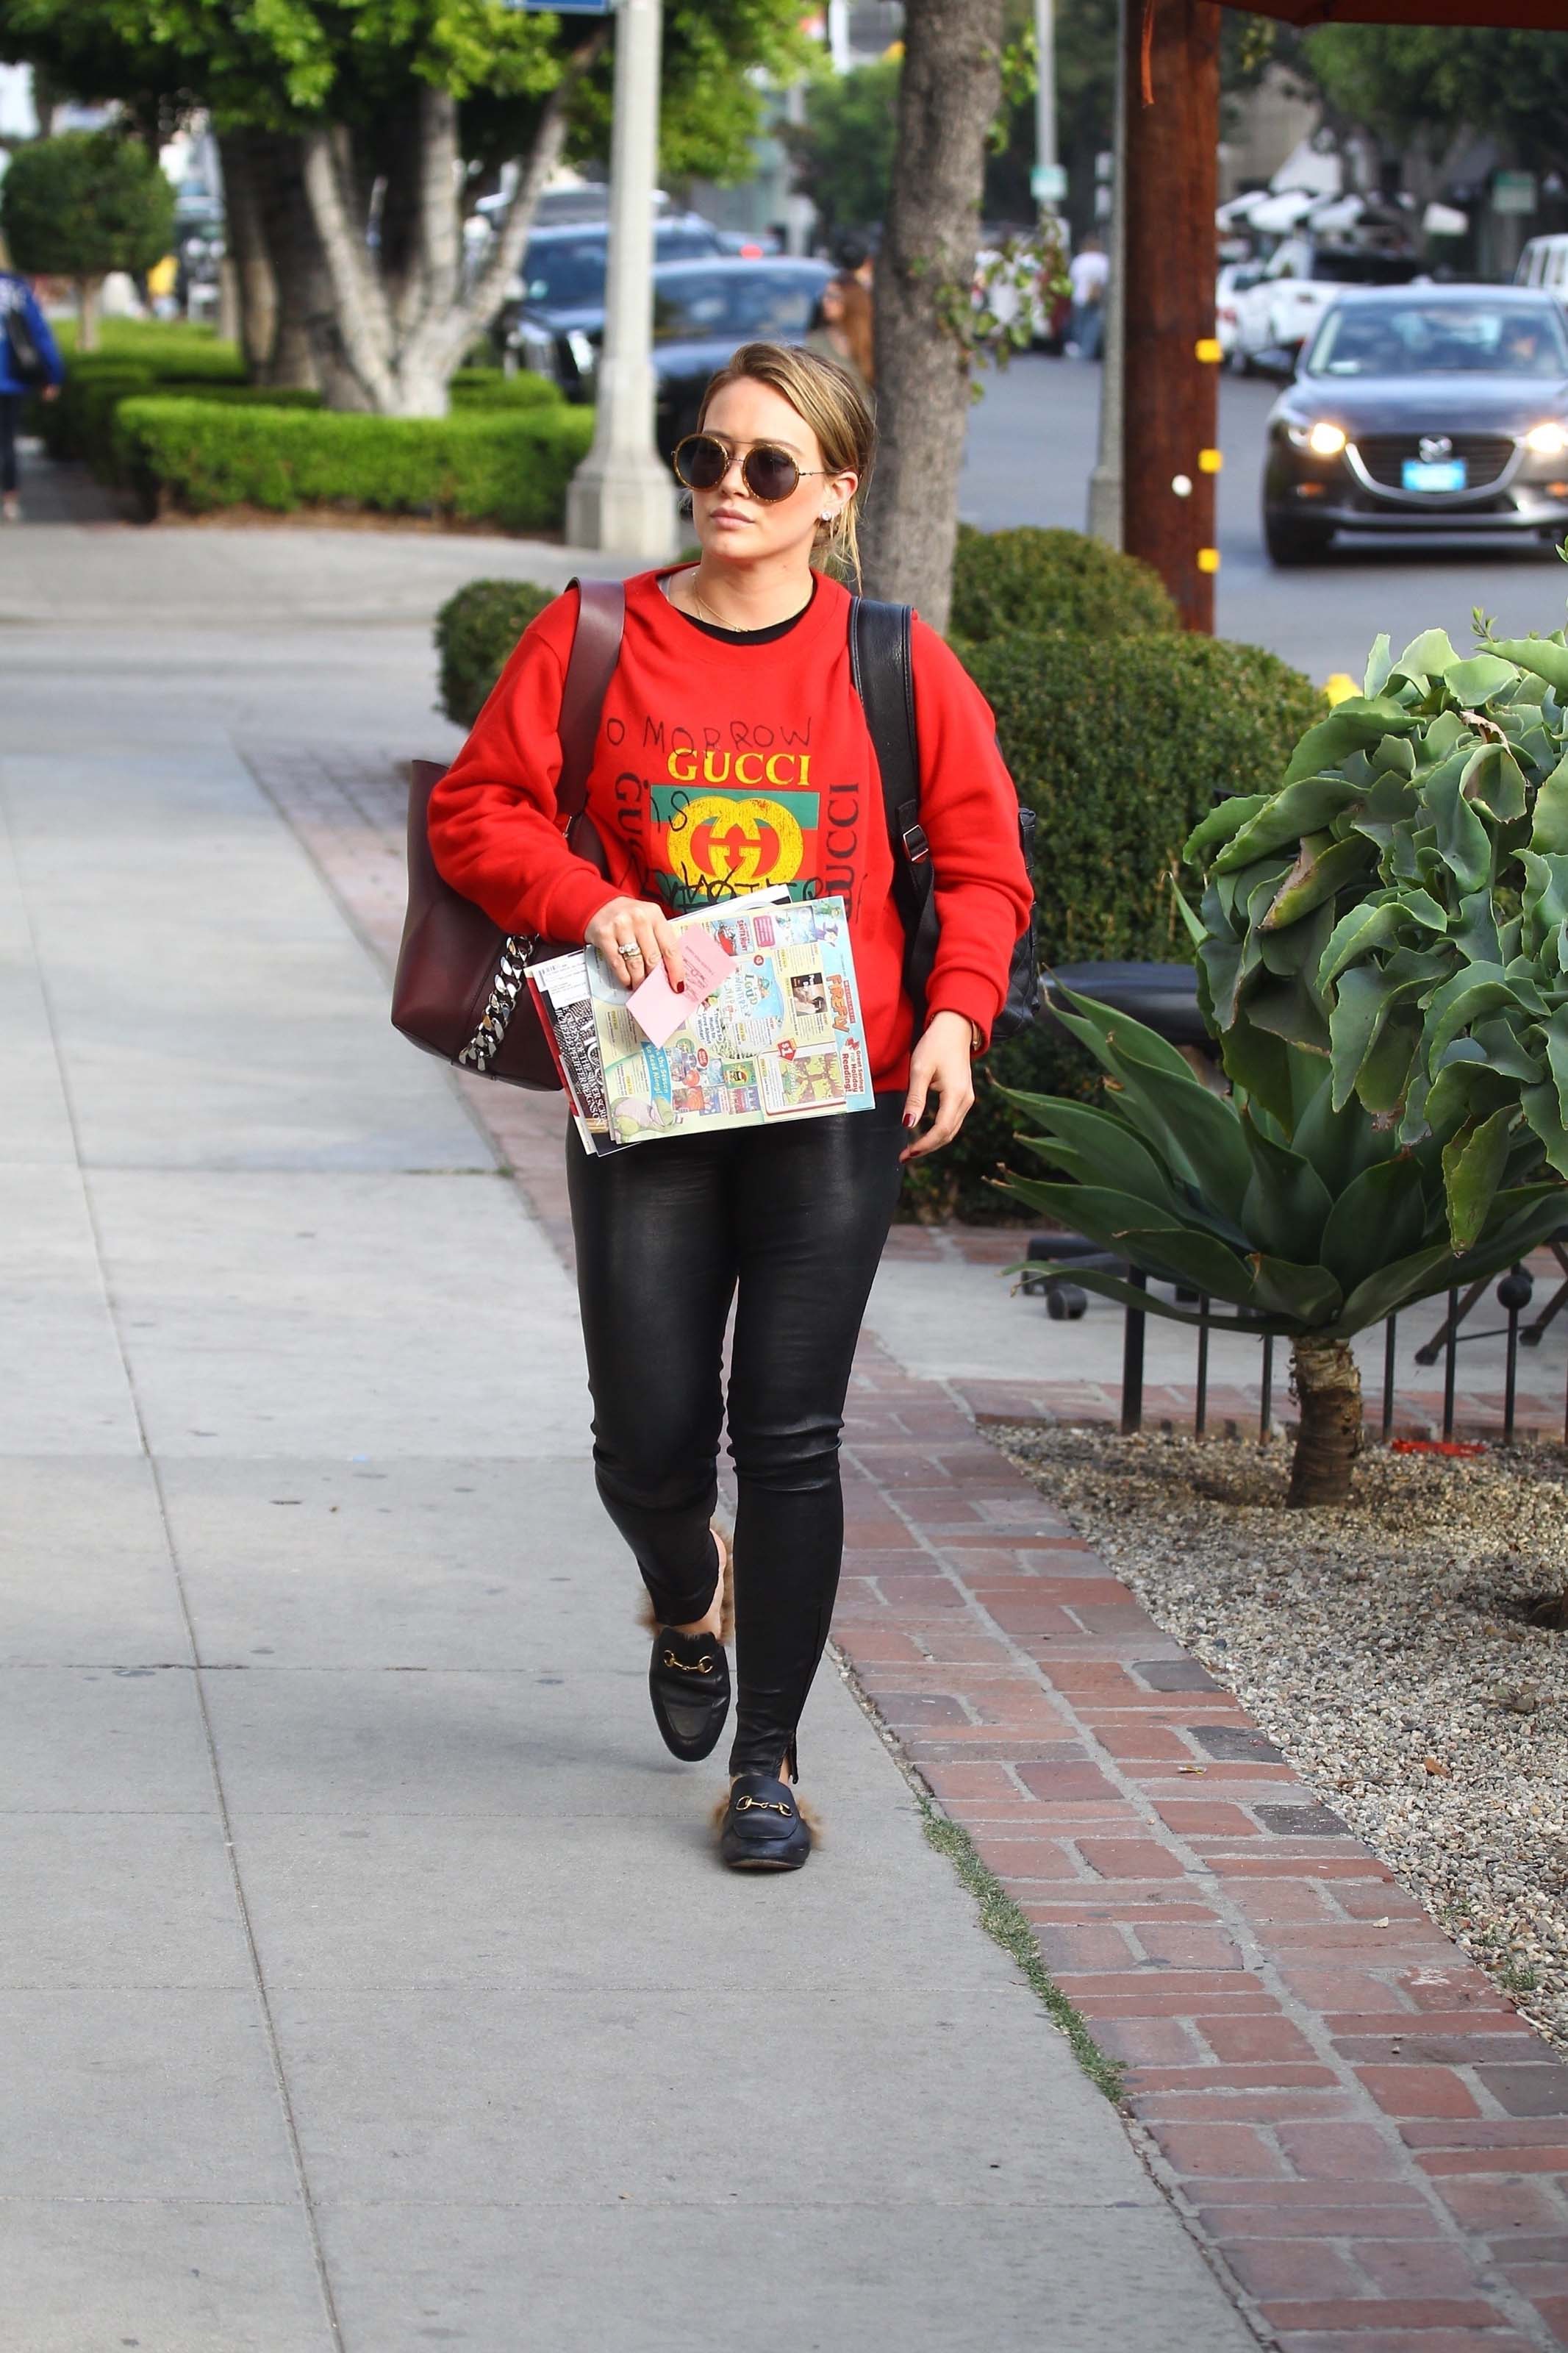 Hilary Duff was spotted arrived at the hair salon